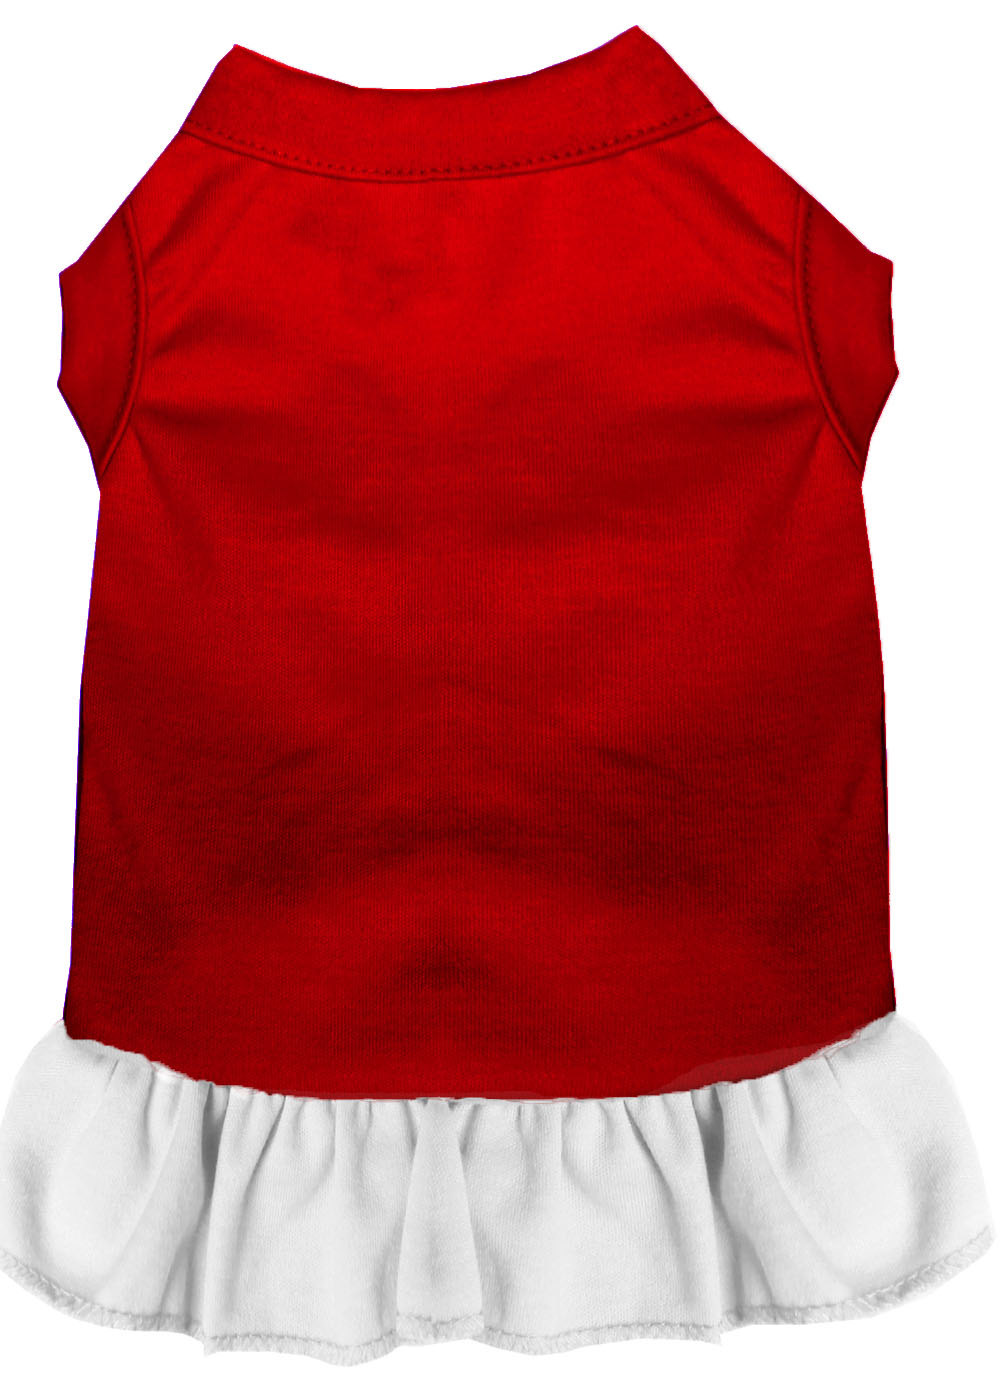 Plain Pet Dress Red with White Med